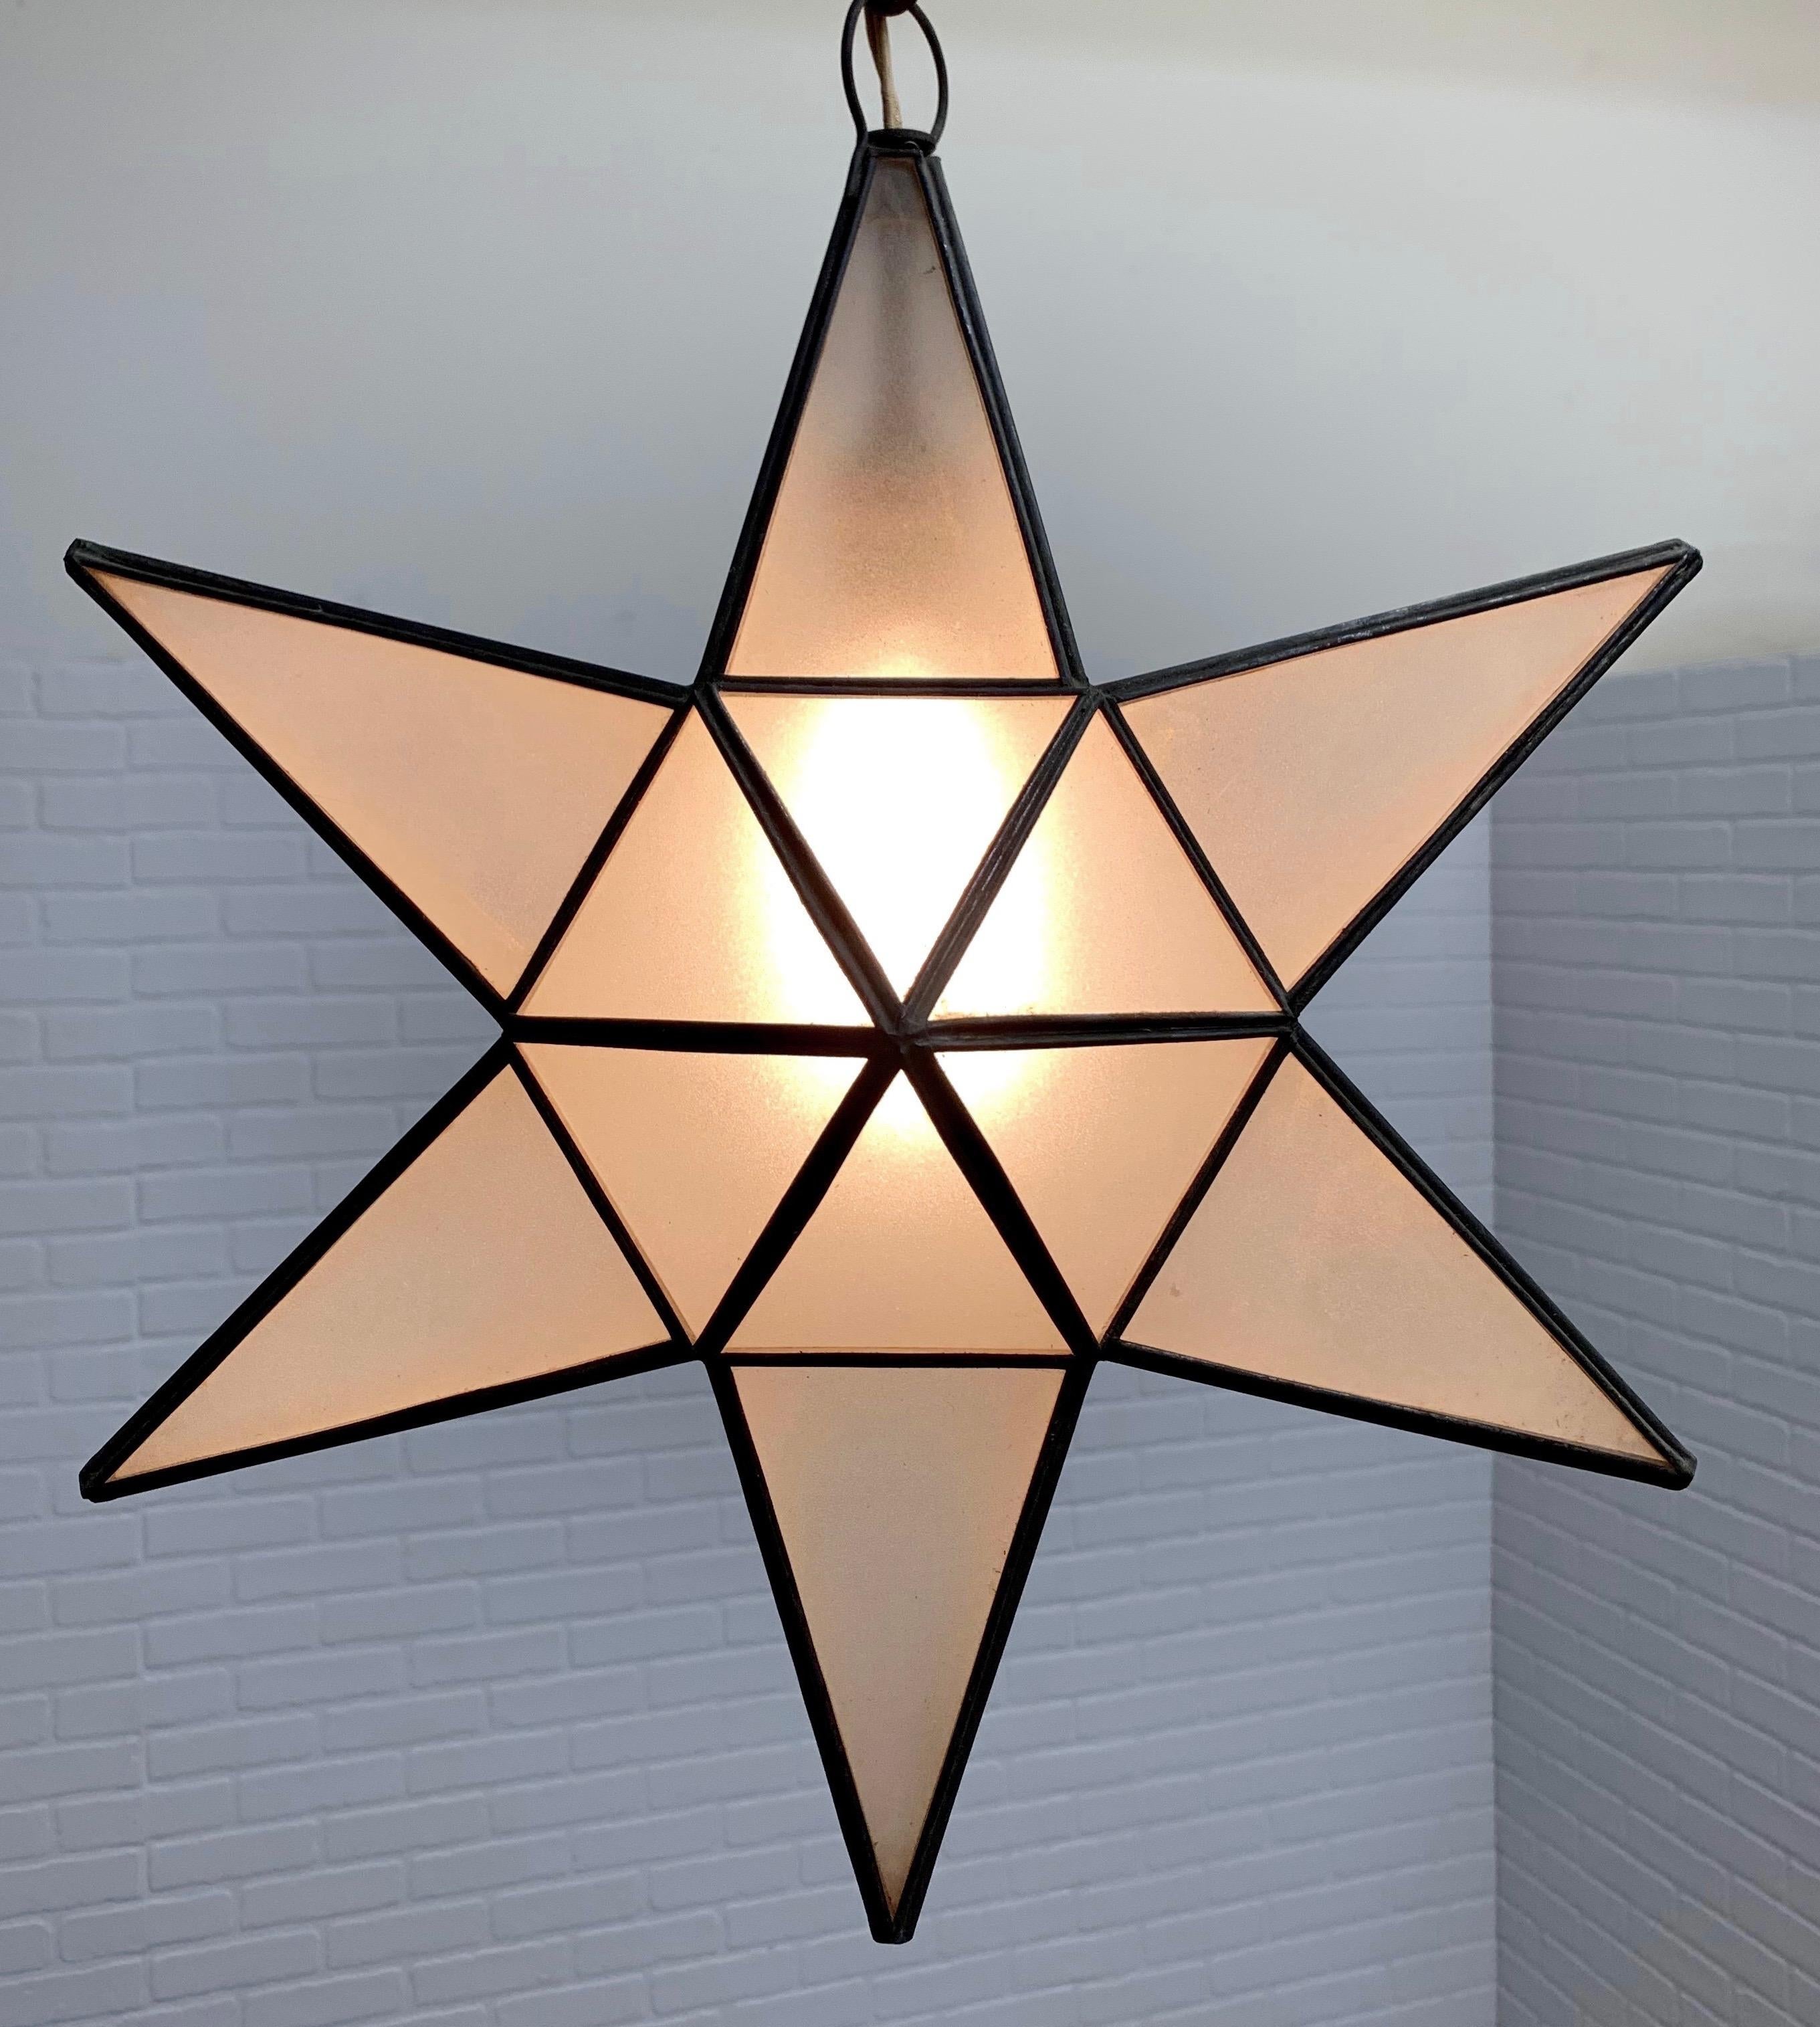 Frosted glass with lead frame form this stunning hanging lamp Height of star is 18